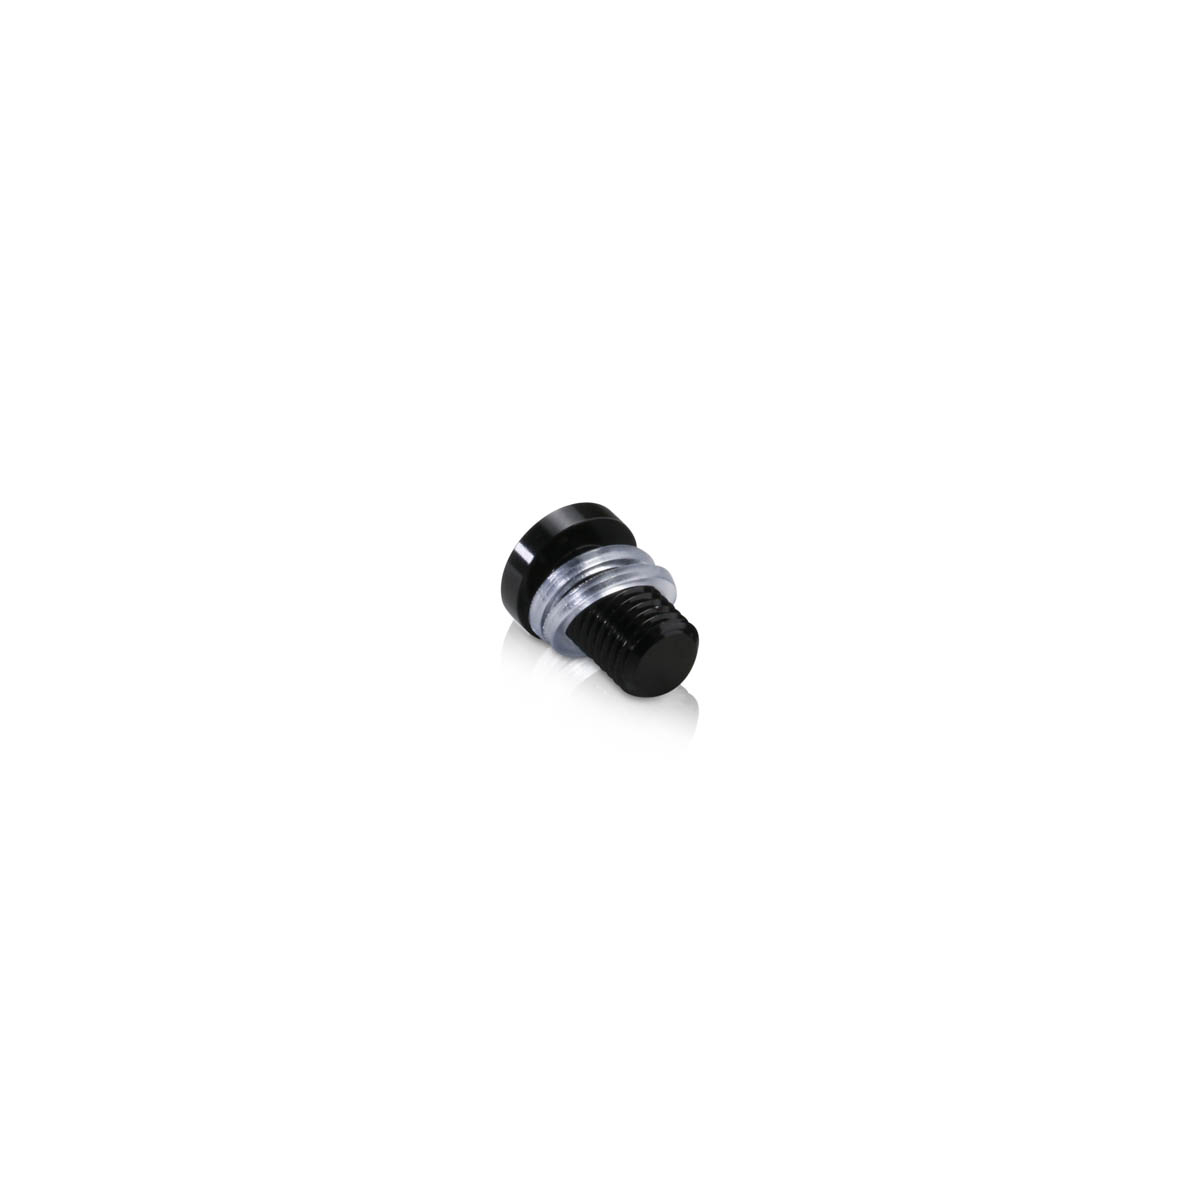 AL12-12B Head replacement for Mbs-Standoffs 1/2'' Diameter x 1/2'' Barrel Length, Aluminum Black Anodized Finish Standoffs (Includes 2 Silicone Washers).